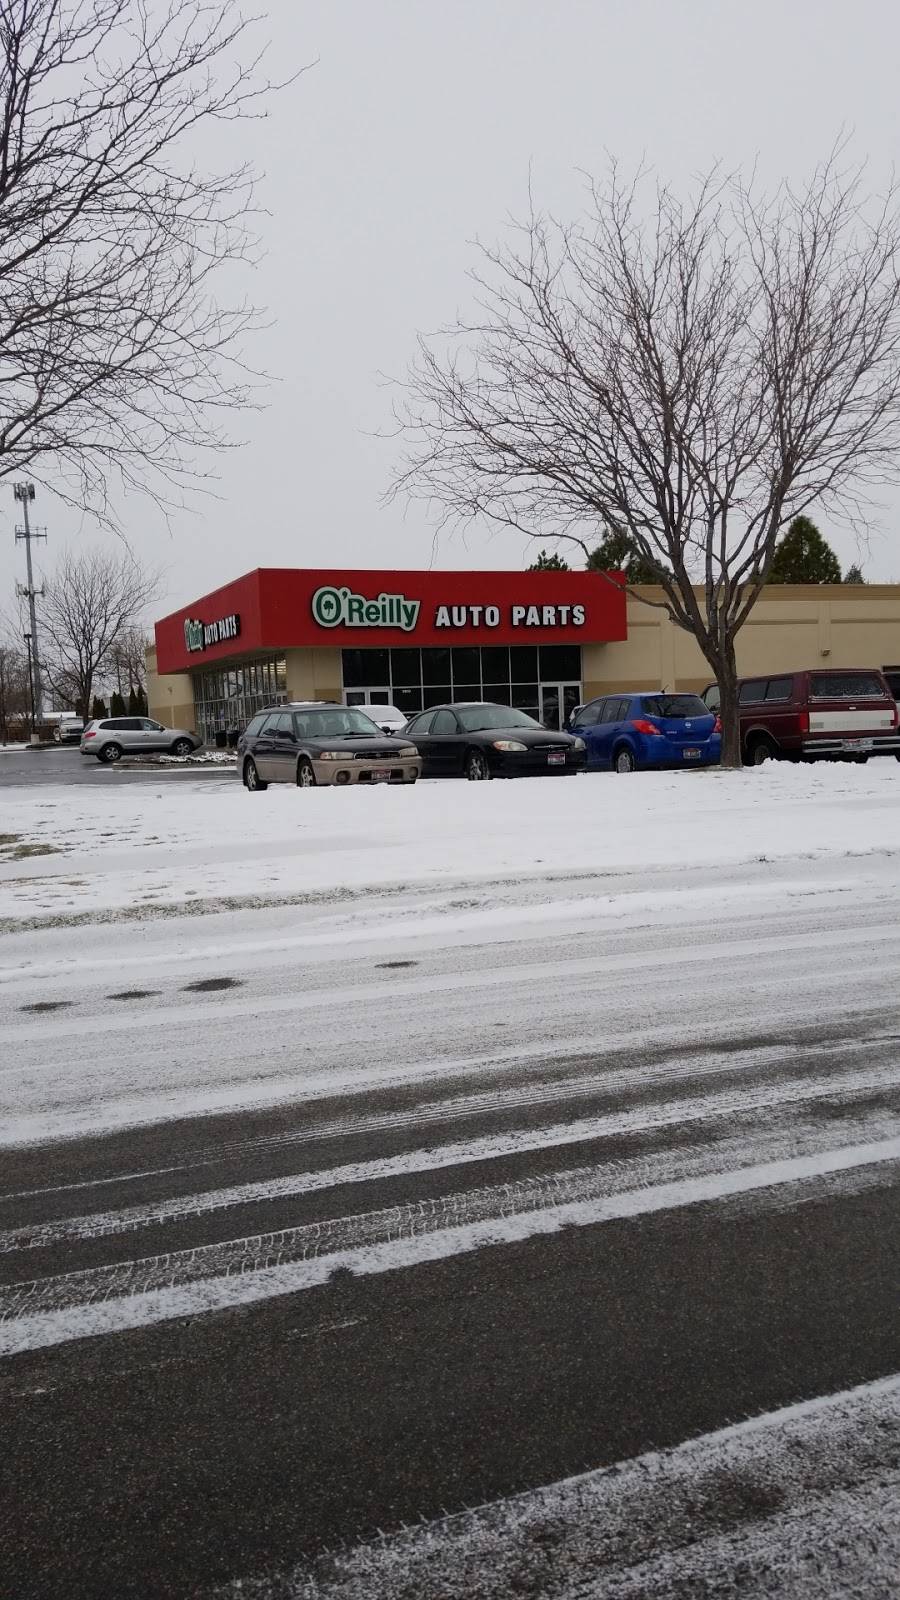 OReilly Auto Parts | 3610 W Overland Rd, Boise, ID 83705, USA | Phone: (208) 336-3955